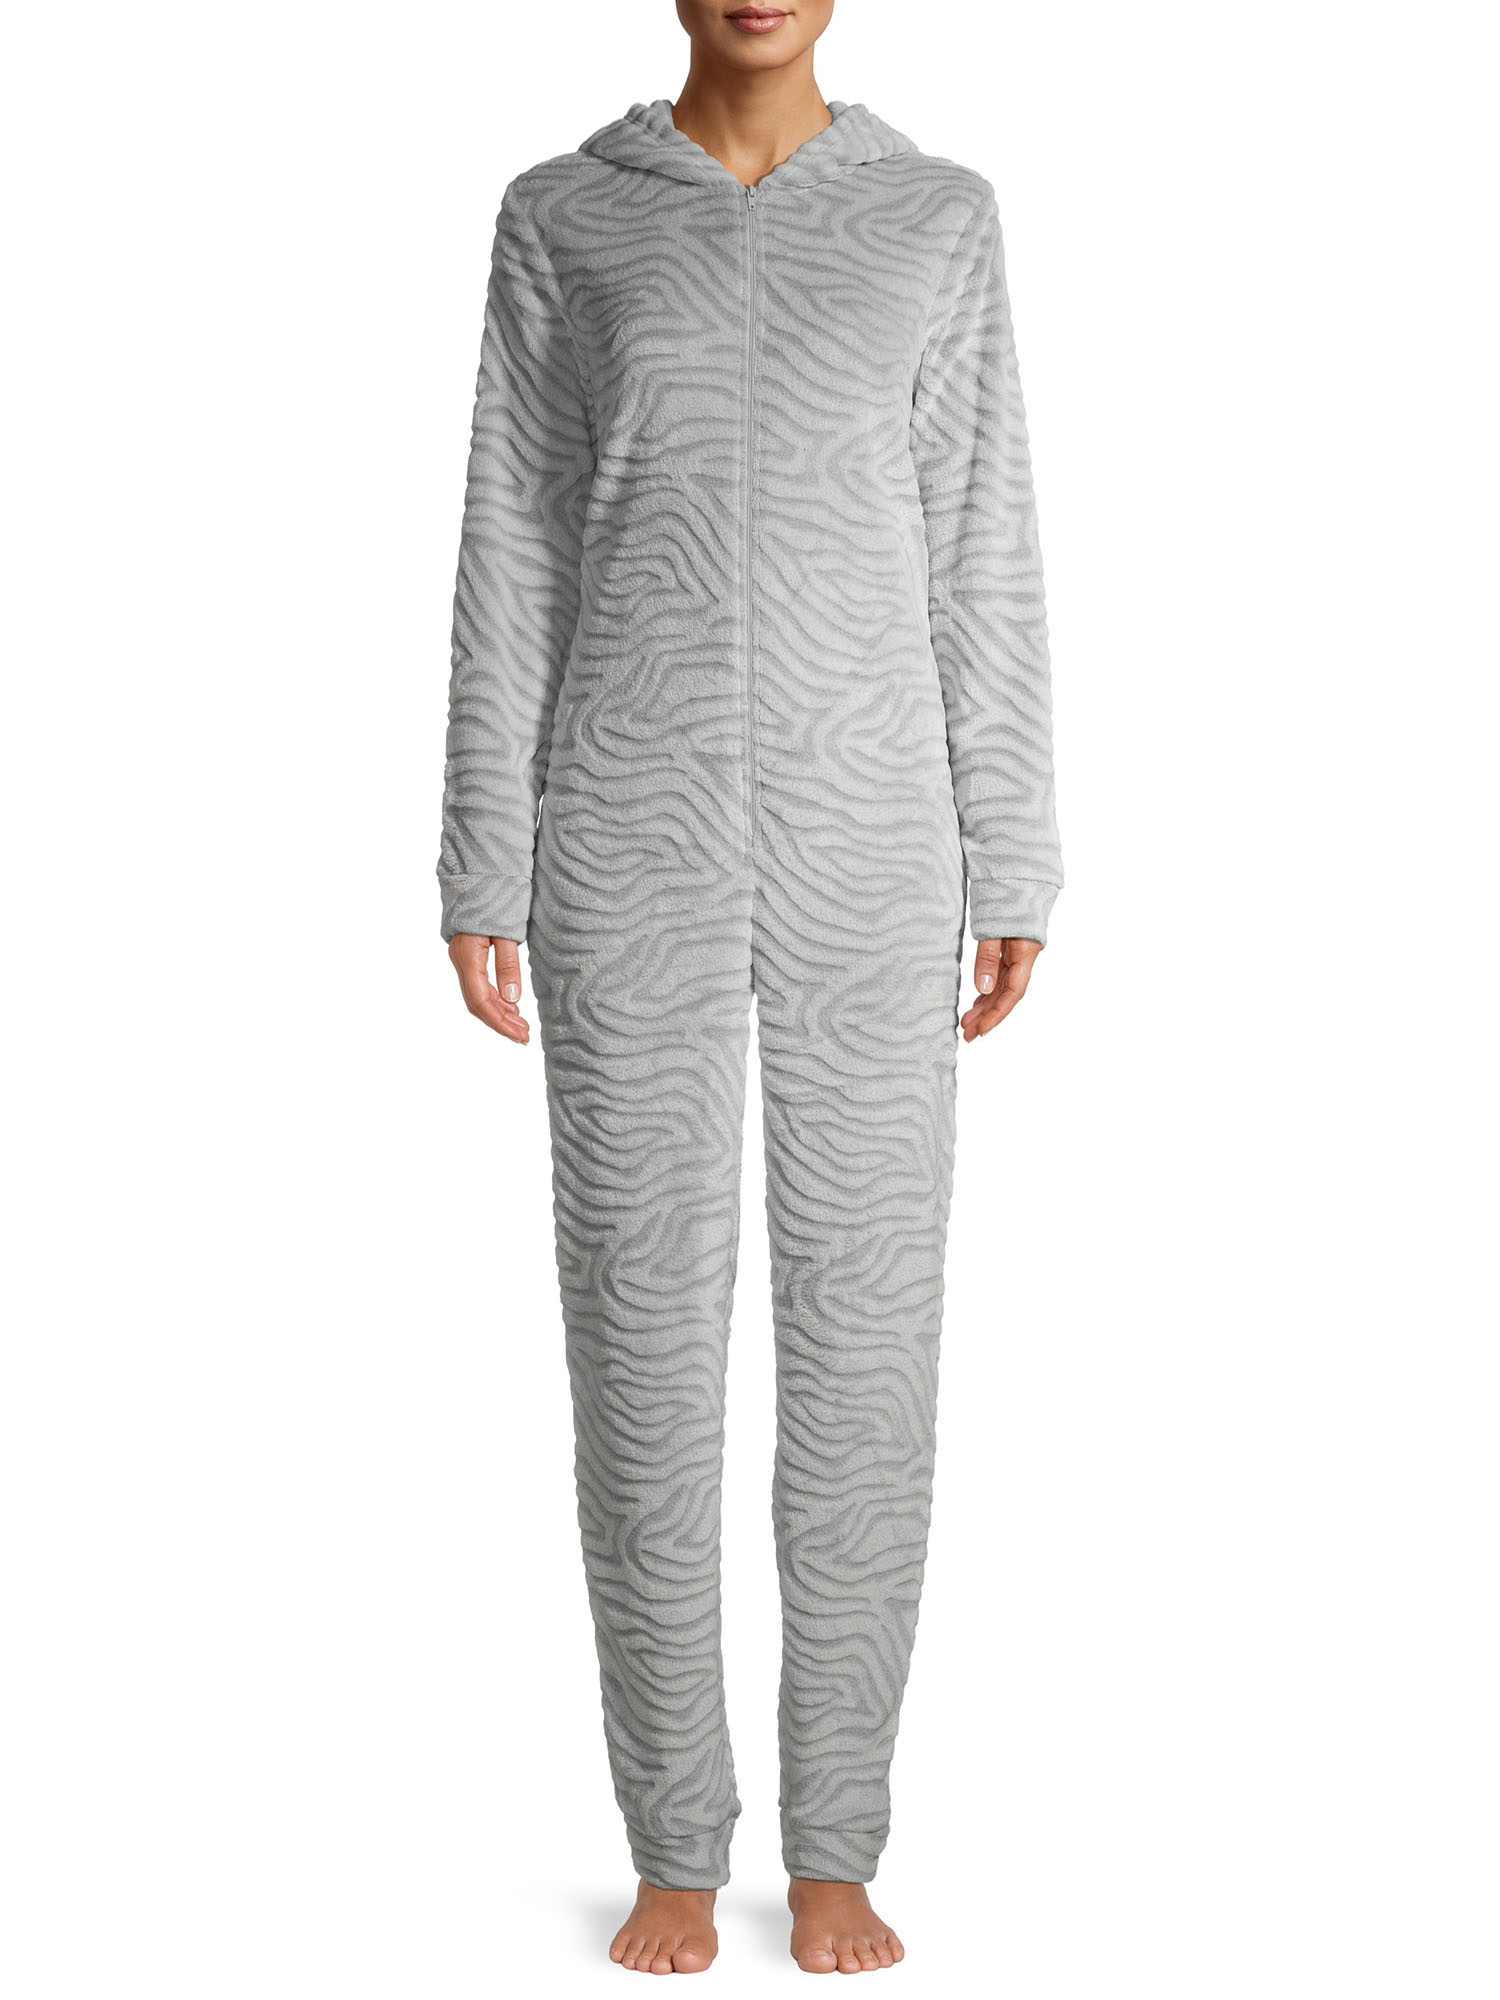 George Women's Character Pajama Union Suit - image 1 of 6